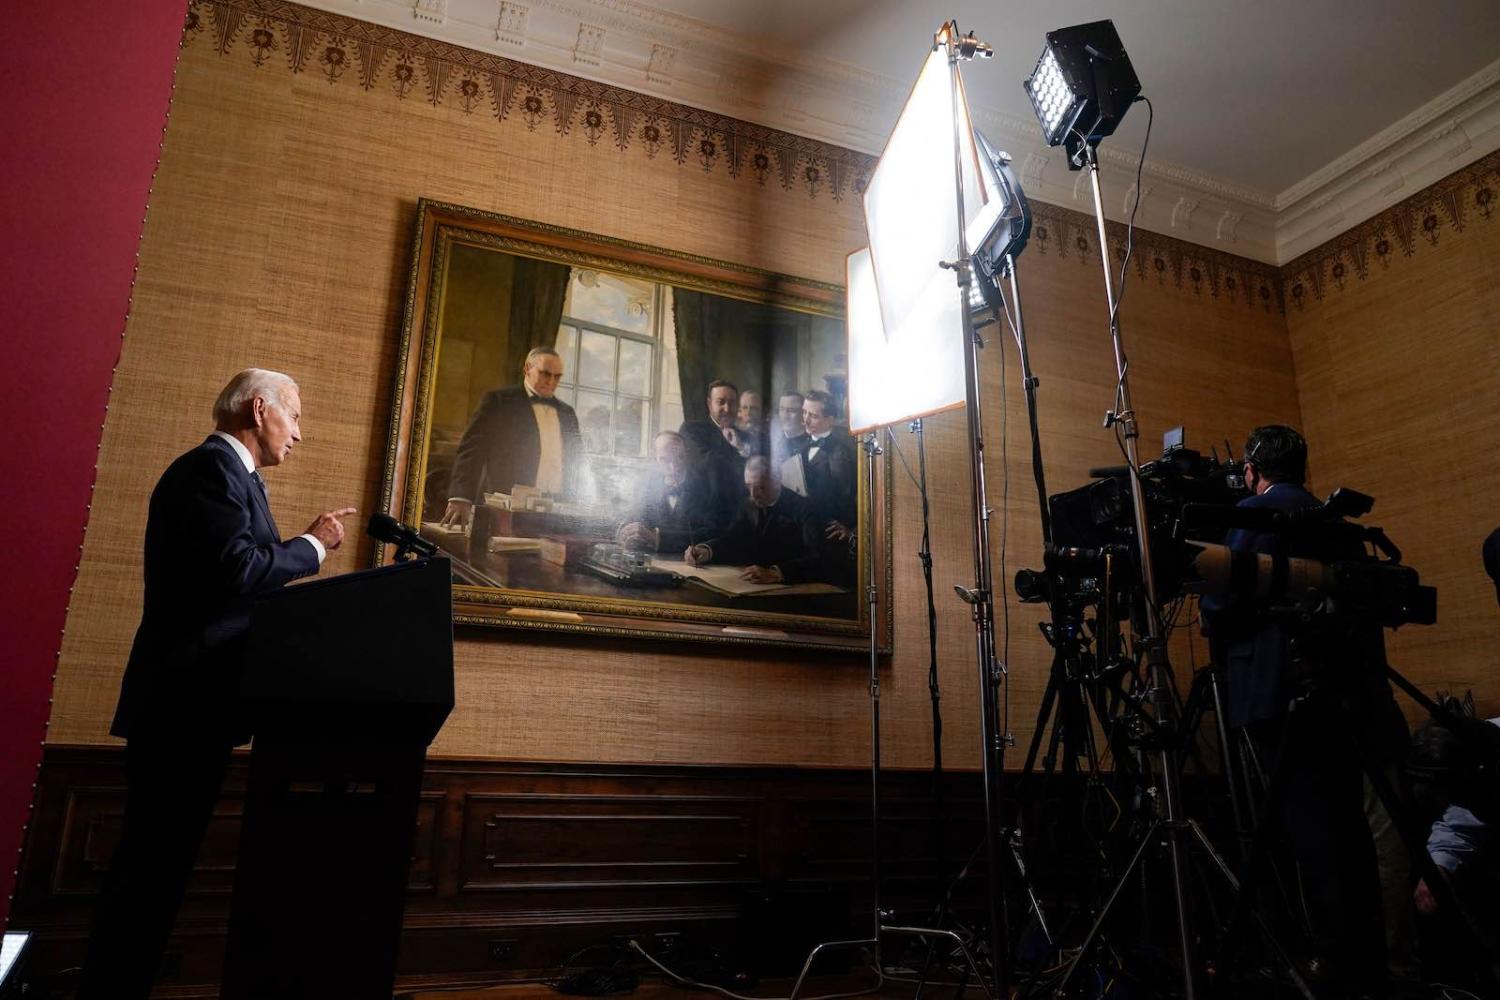 US President Joe Biden speaks in the White House about the withdrawal of US troops from Afghanistan, 14 April 2021 (Andrew Harnik/Pool/AFP via Getty Images)